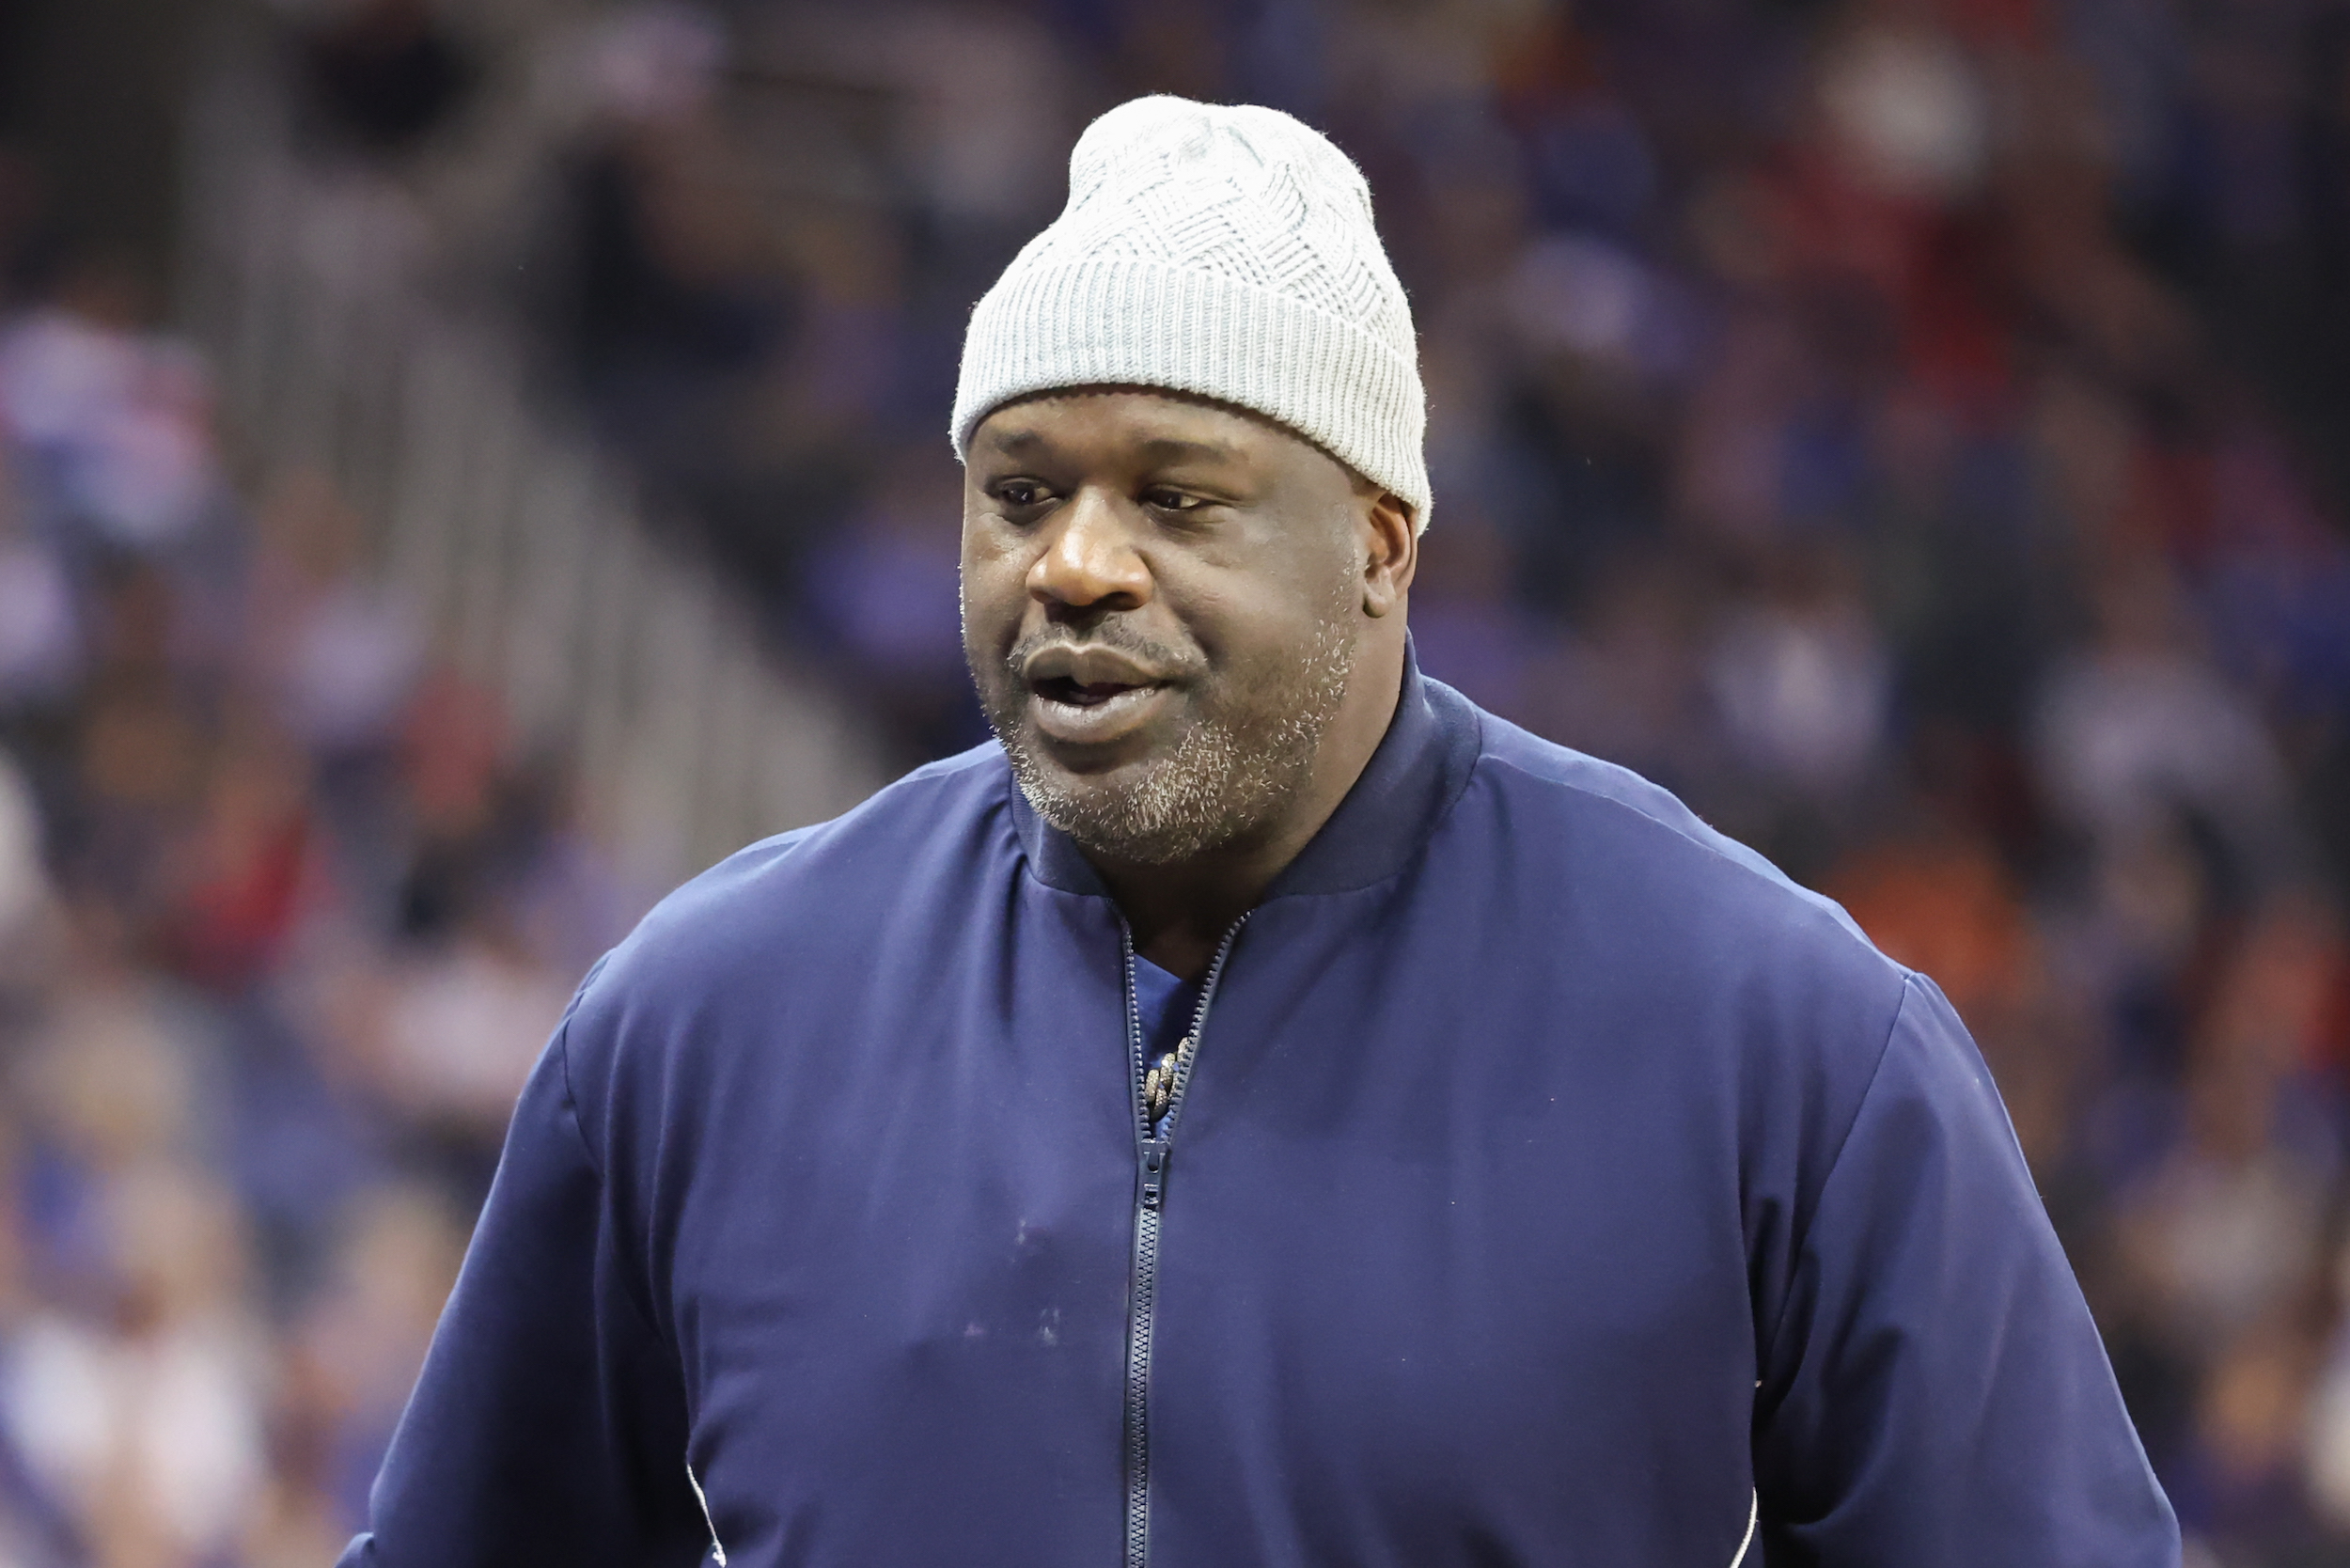 Shaquille O'Neal wears a hat and becomes practically invisible.